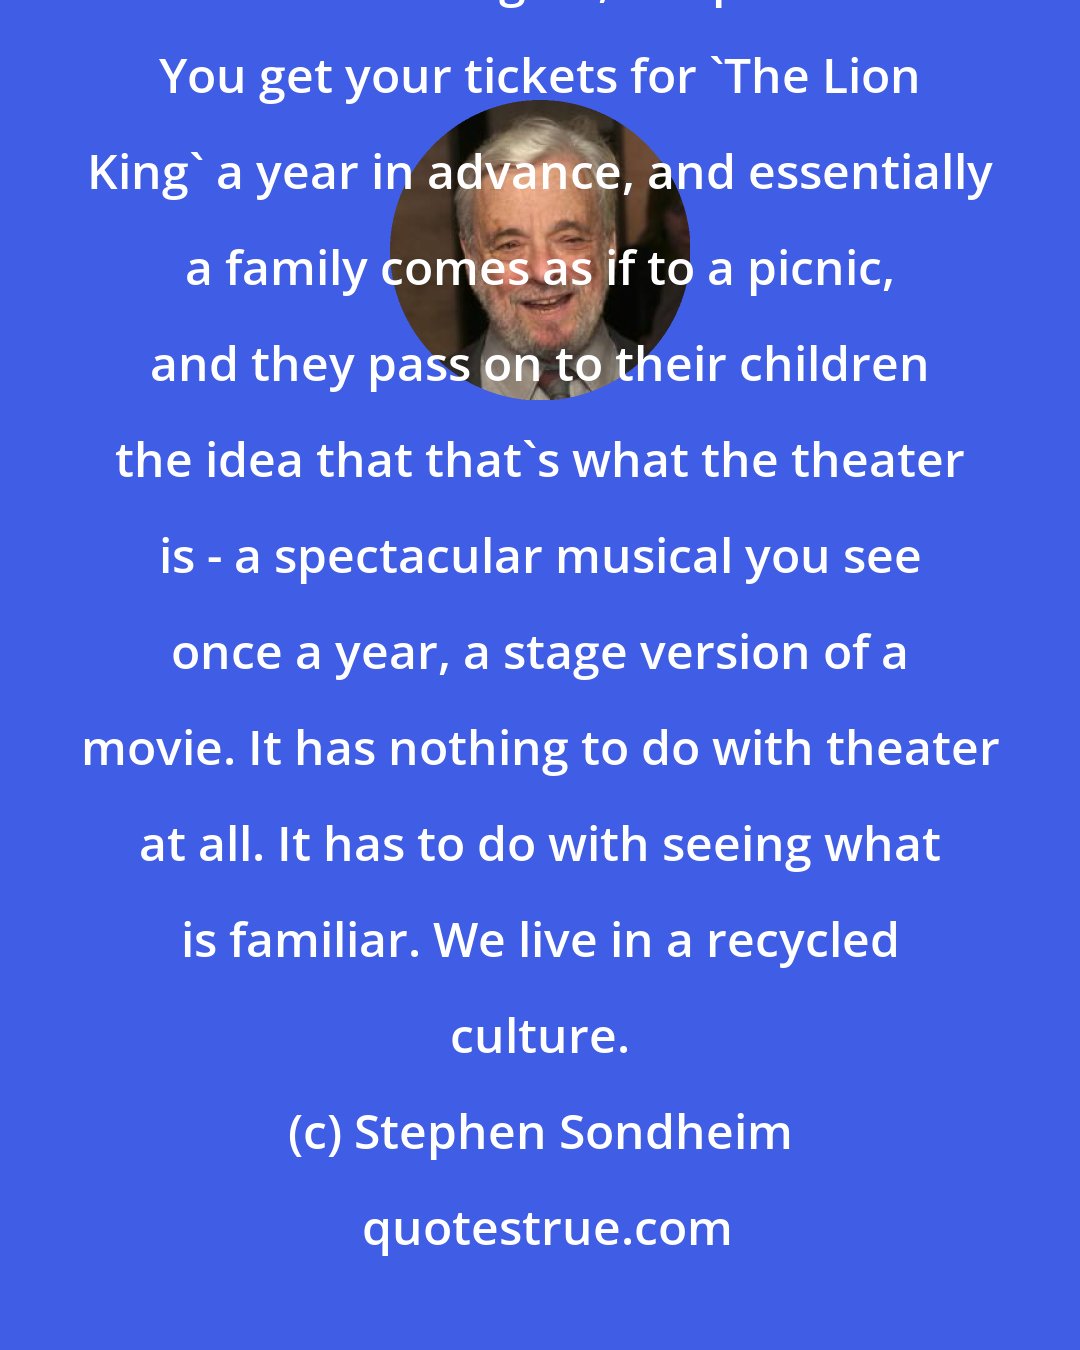 Stephen Sondheim: You have two kinds of shows on Broadway - revivals and the same kind of musicals over and over again, all spectacles. You get your tickets for 'The Lion King' a year in advance, and essentially a family comes as if to a picnic, and they pass on to their children the idea that that's what the theater is - a spectacular musical you see once a year, a stage version of a movie. It has nothing to do with theater at all. It has to do with seeing what is familiar. We live in a recycled culture.